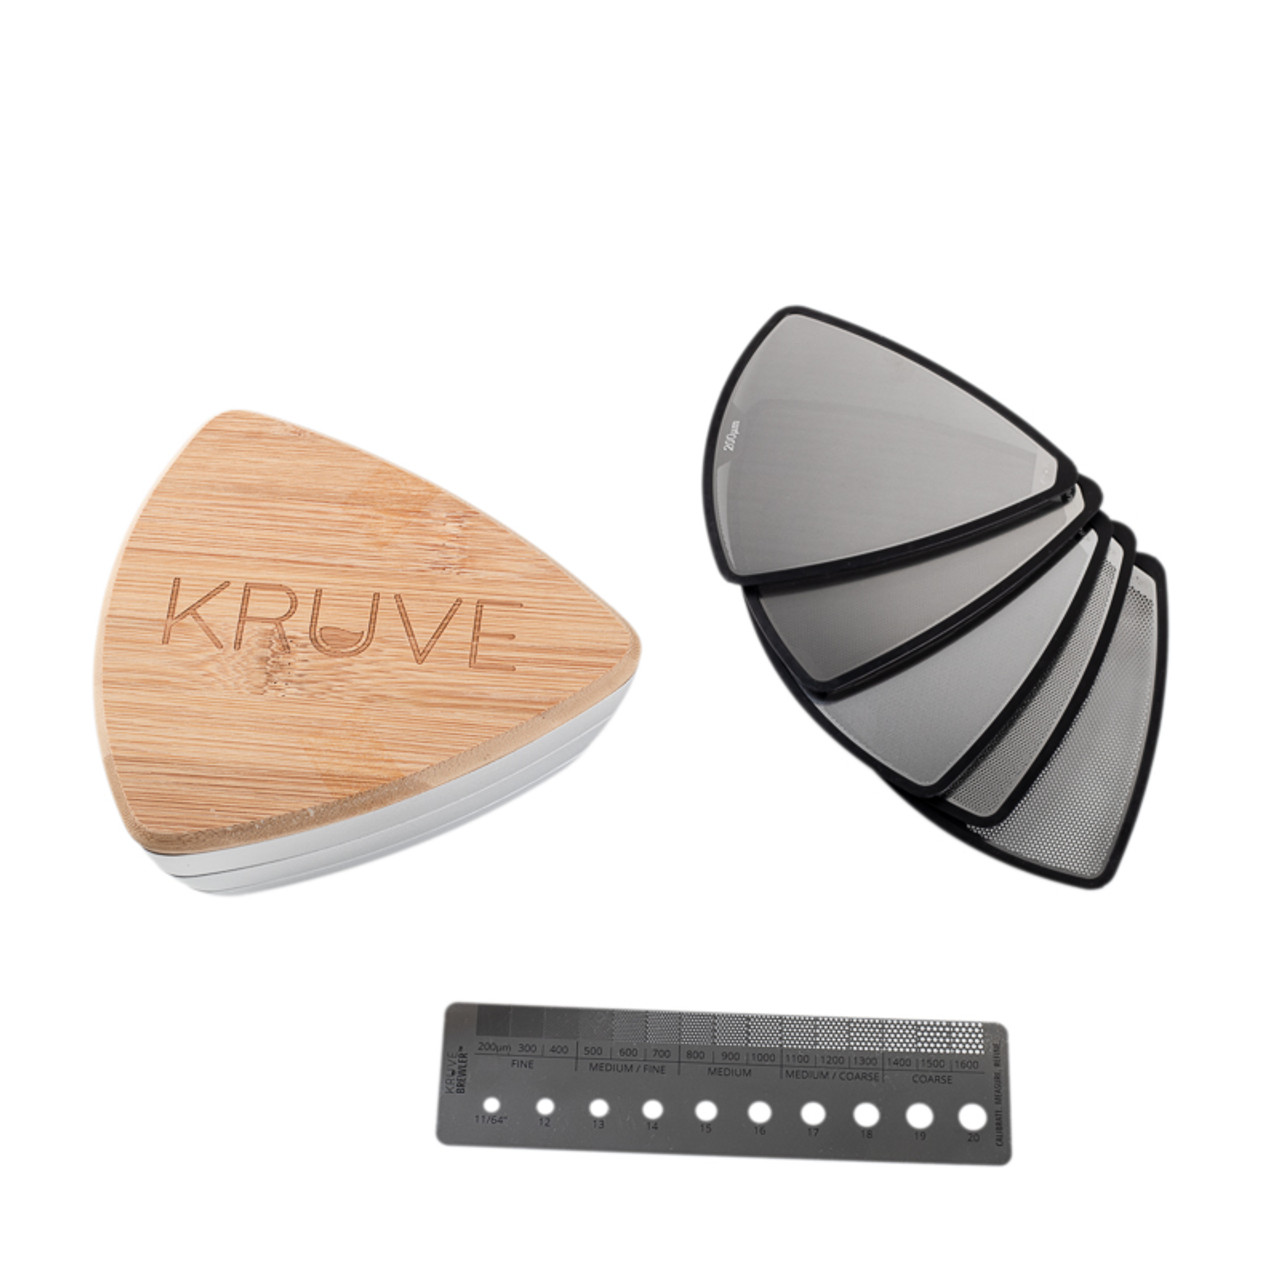 Kruve Coffee Sifting System